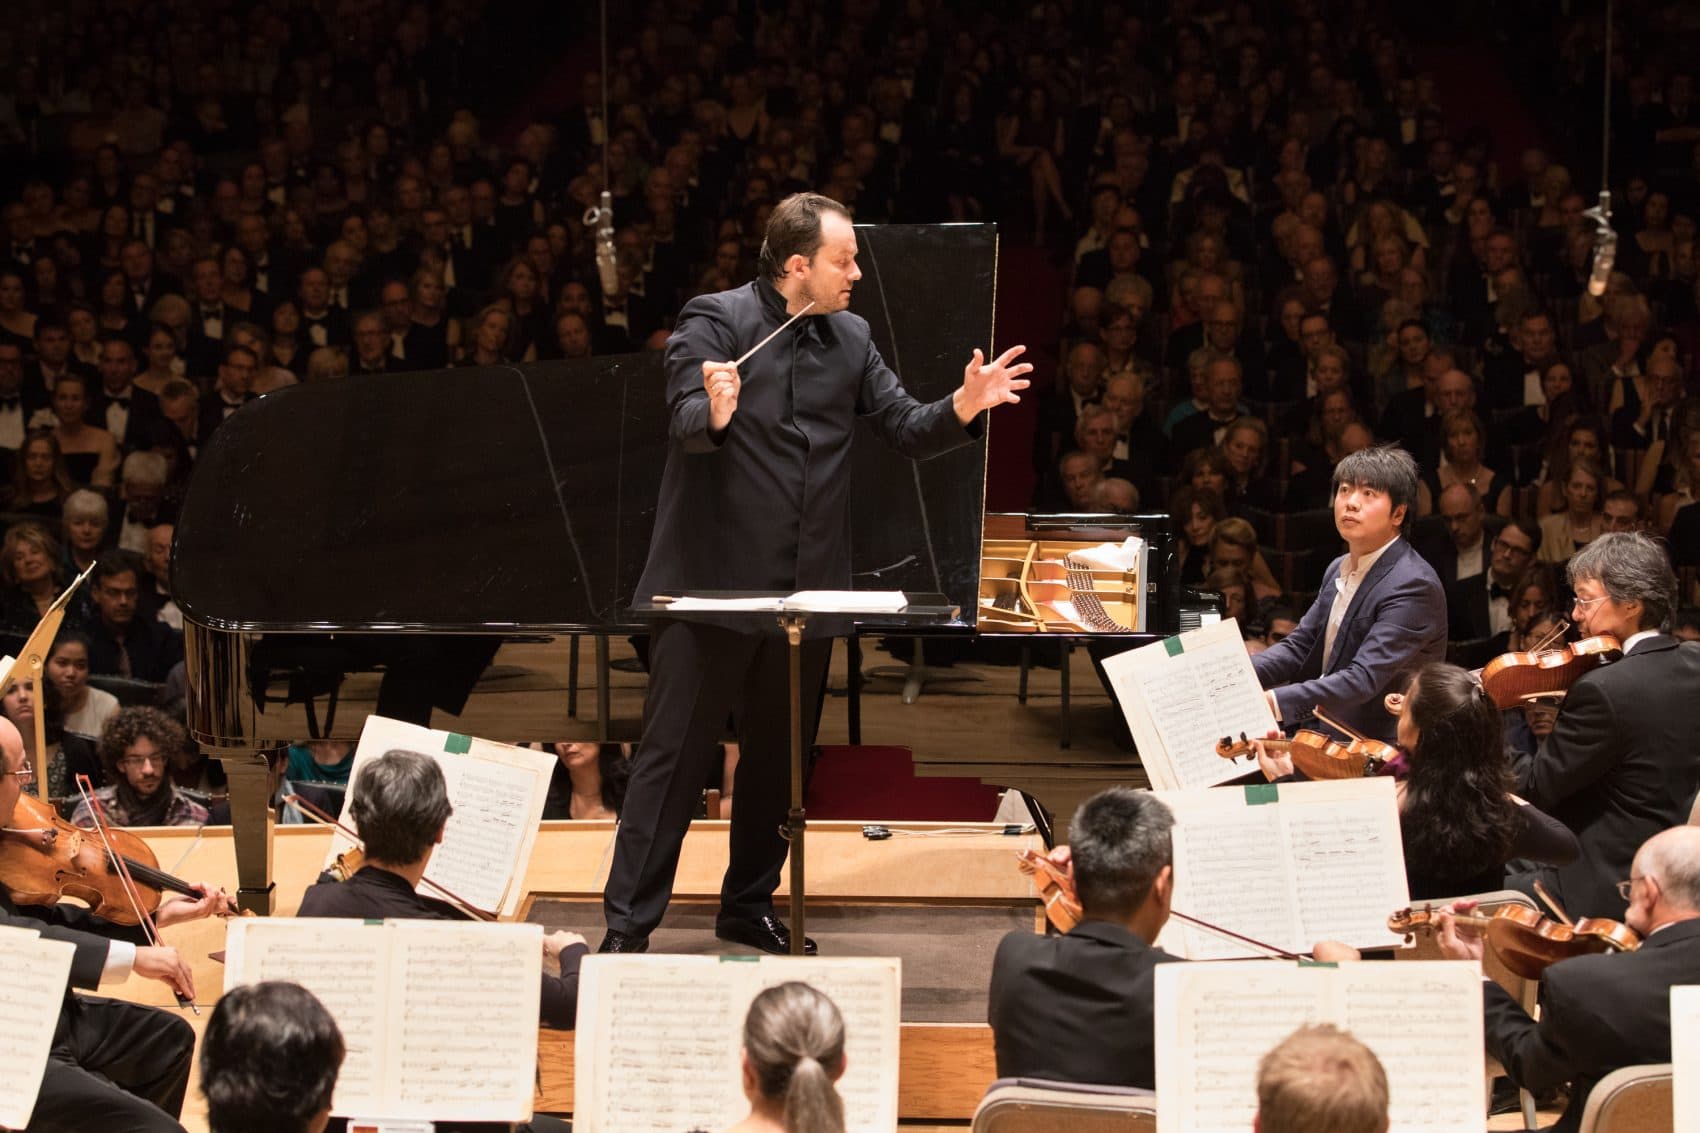 Andris Nelsons leads the Boston Symphony Orchestra on opening night. (Courtesy Michael Blanchard)